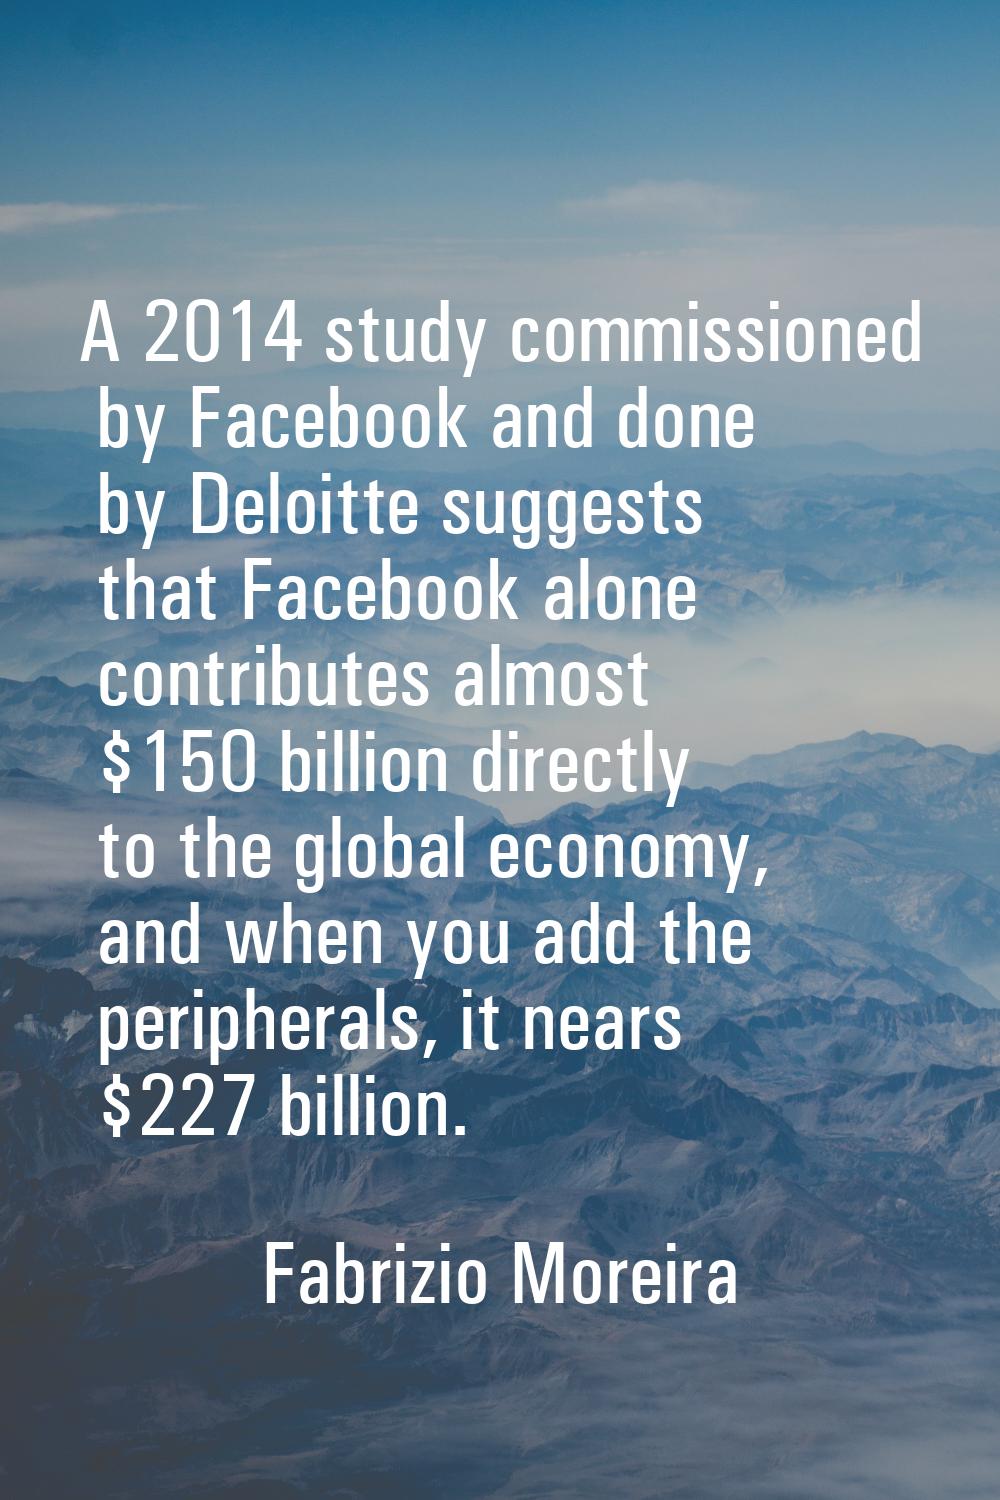 A 2014 study commissioned by Facebook and done by Deloitte suggests that Facebook alone contributes